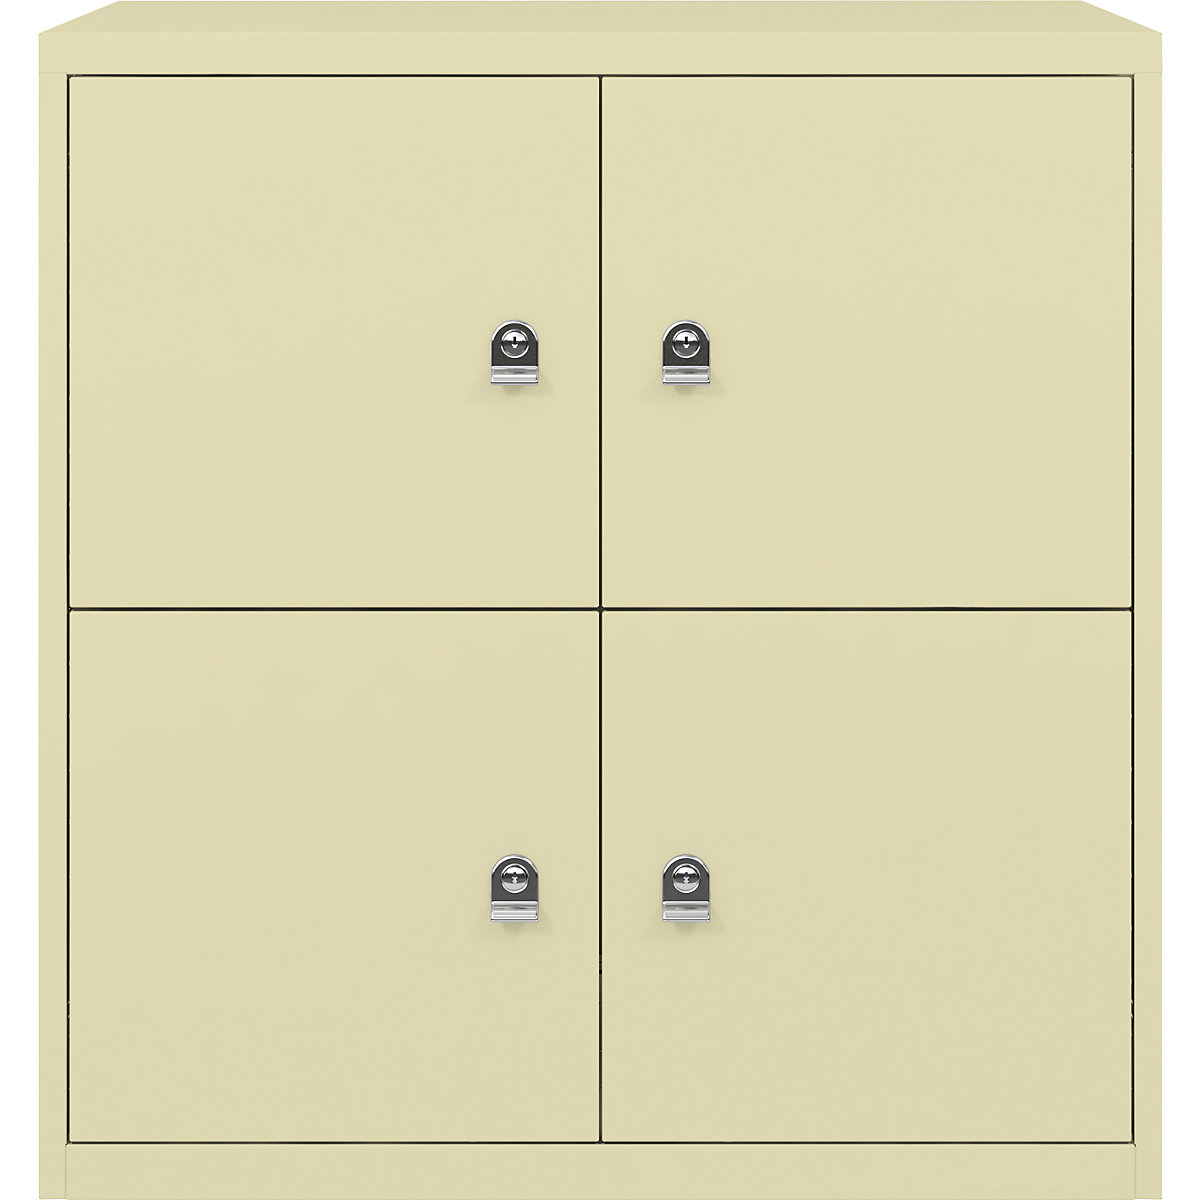 LateralFile™ lodge – BISLEY, with 4 lockable compartments, height 375 mm each, cream